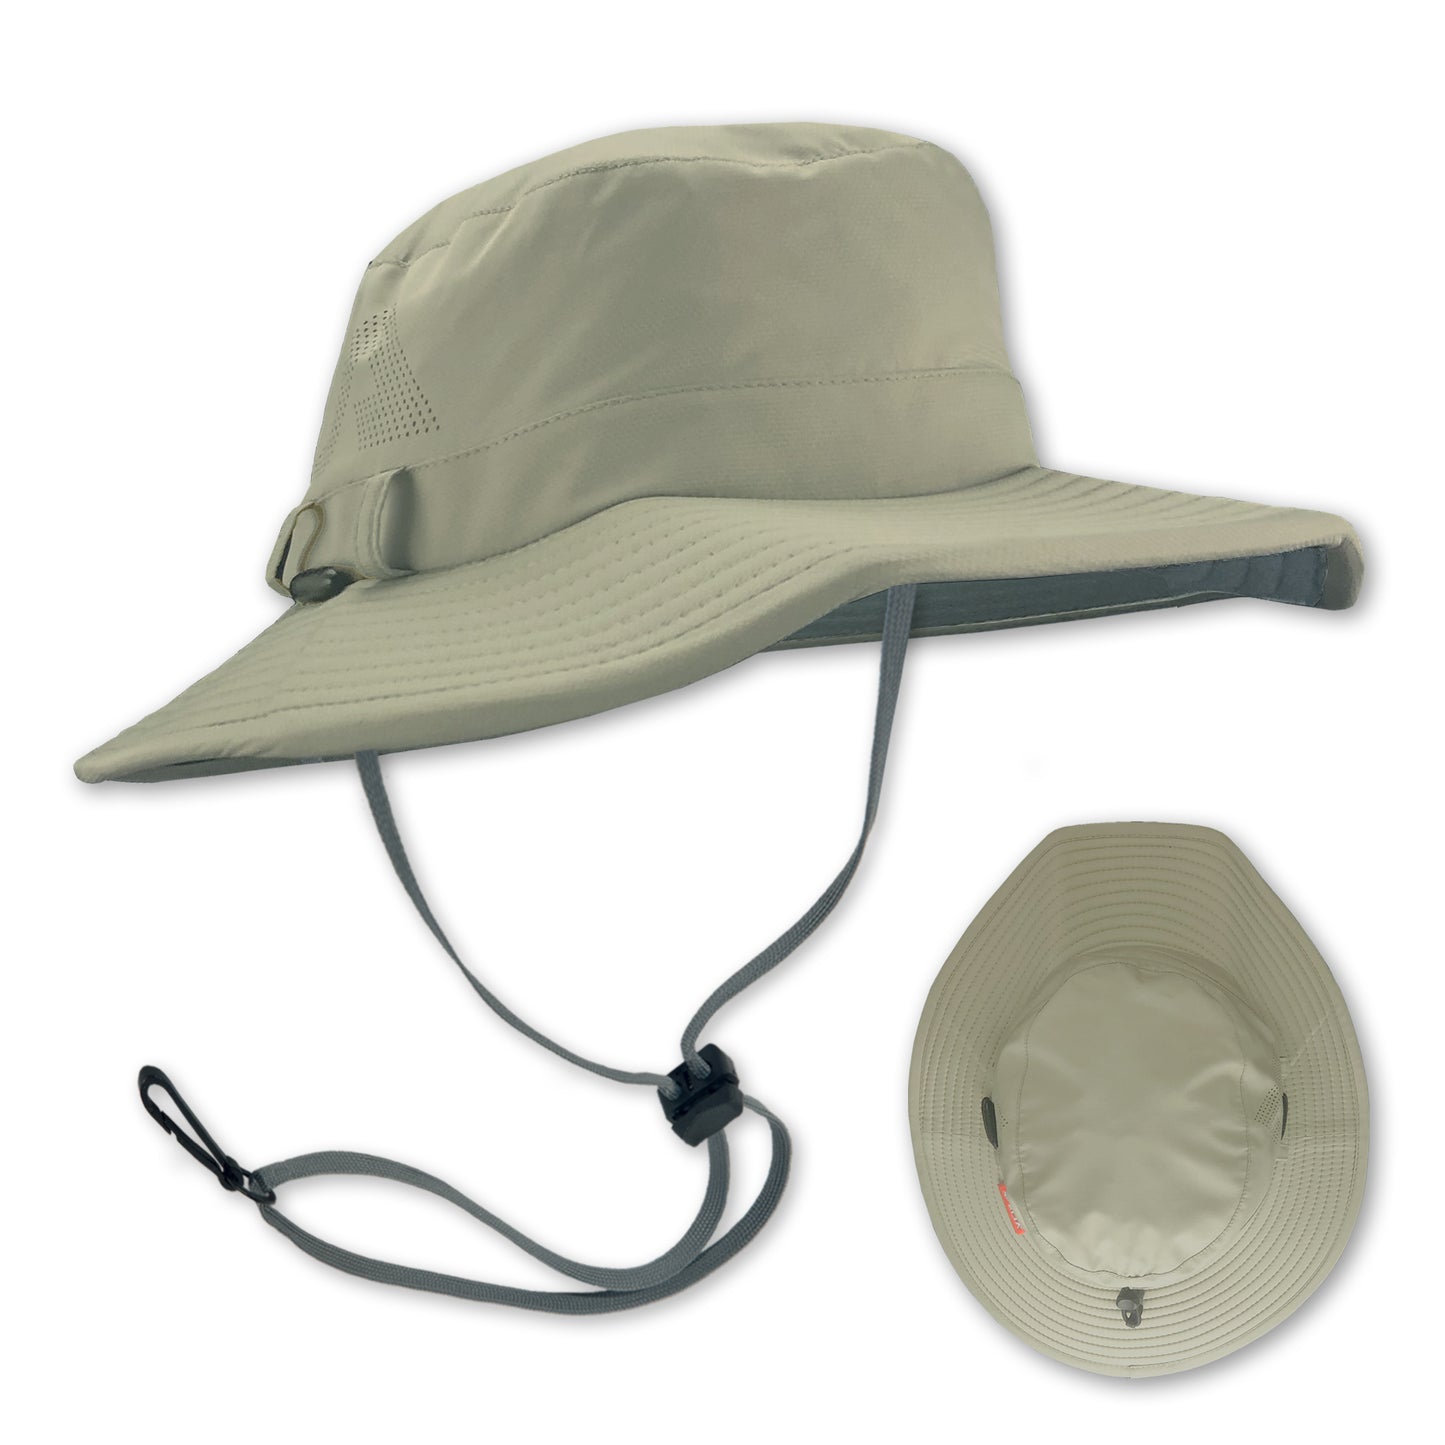 The Condor sun hat in the color Field Khaki is a more traditional looking style features a deeper crown for air flow and a wider downward angled brim for more UV protection. A full vapor barrier liner keeps the fabric off of your scalp and allows air to flow through the laser cut venting holes and breathable fabric.. The new Condor does NOT have a stash pocket. This was done to make the hat lighter.